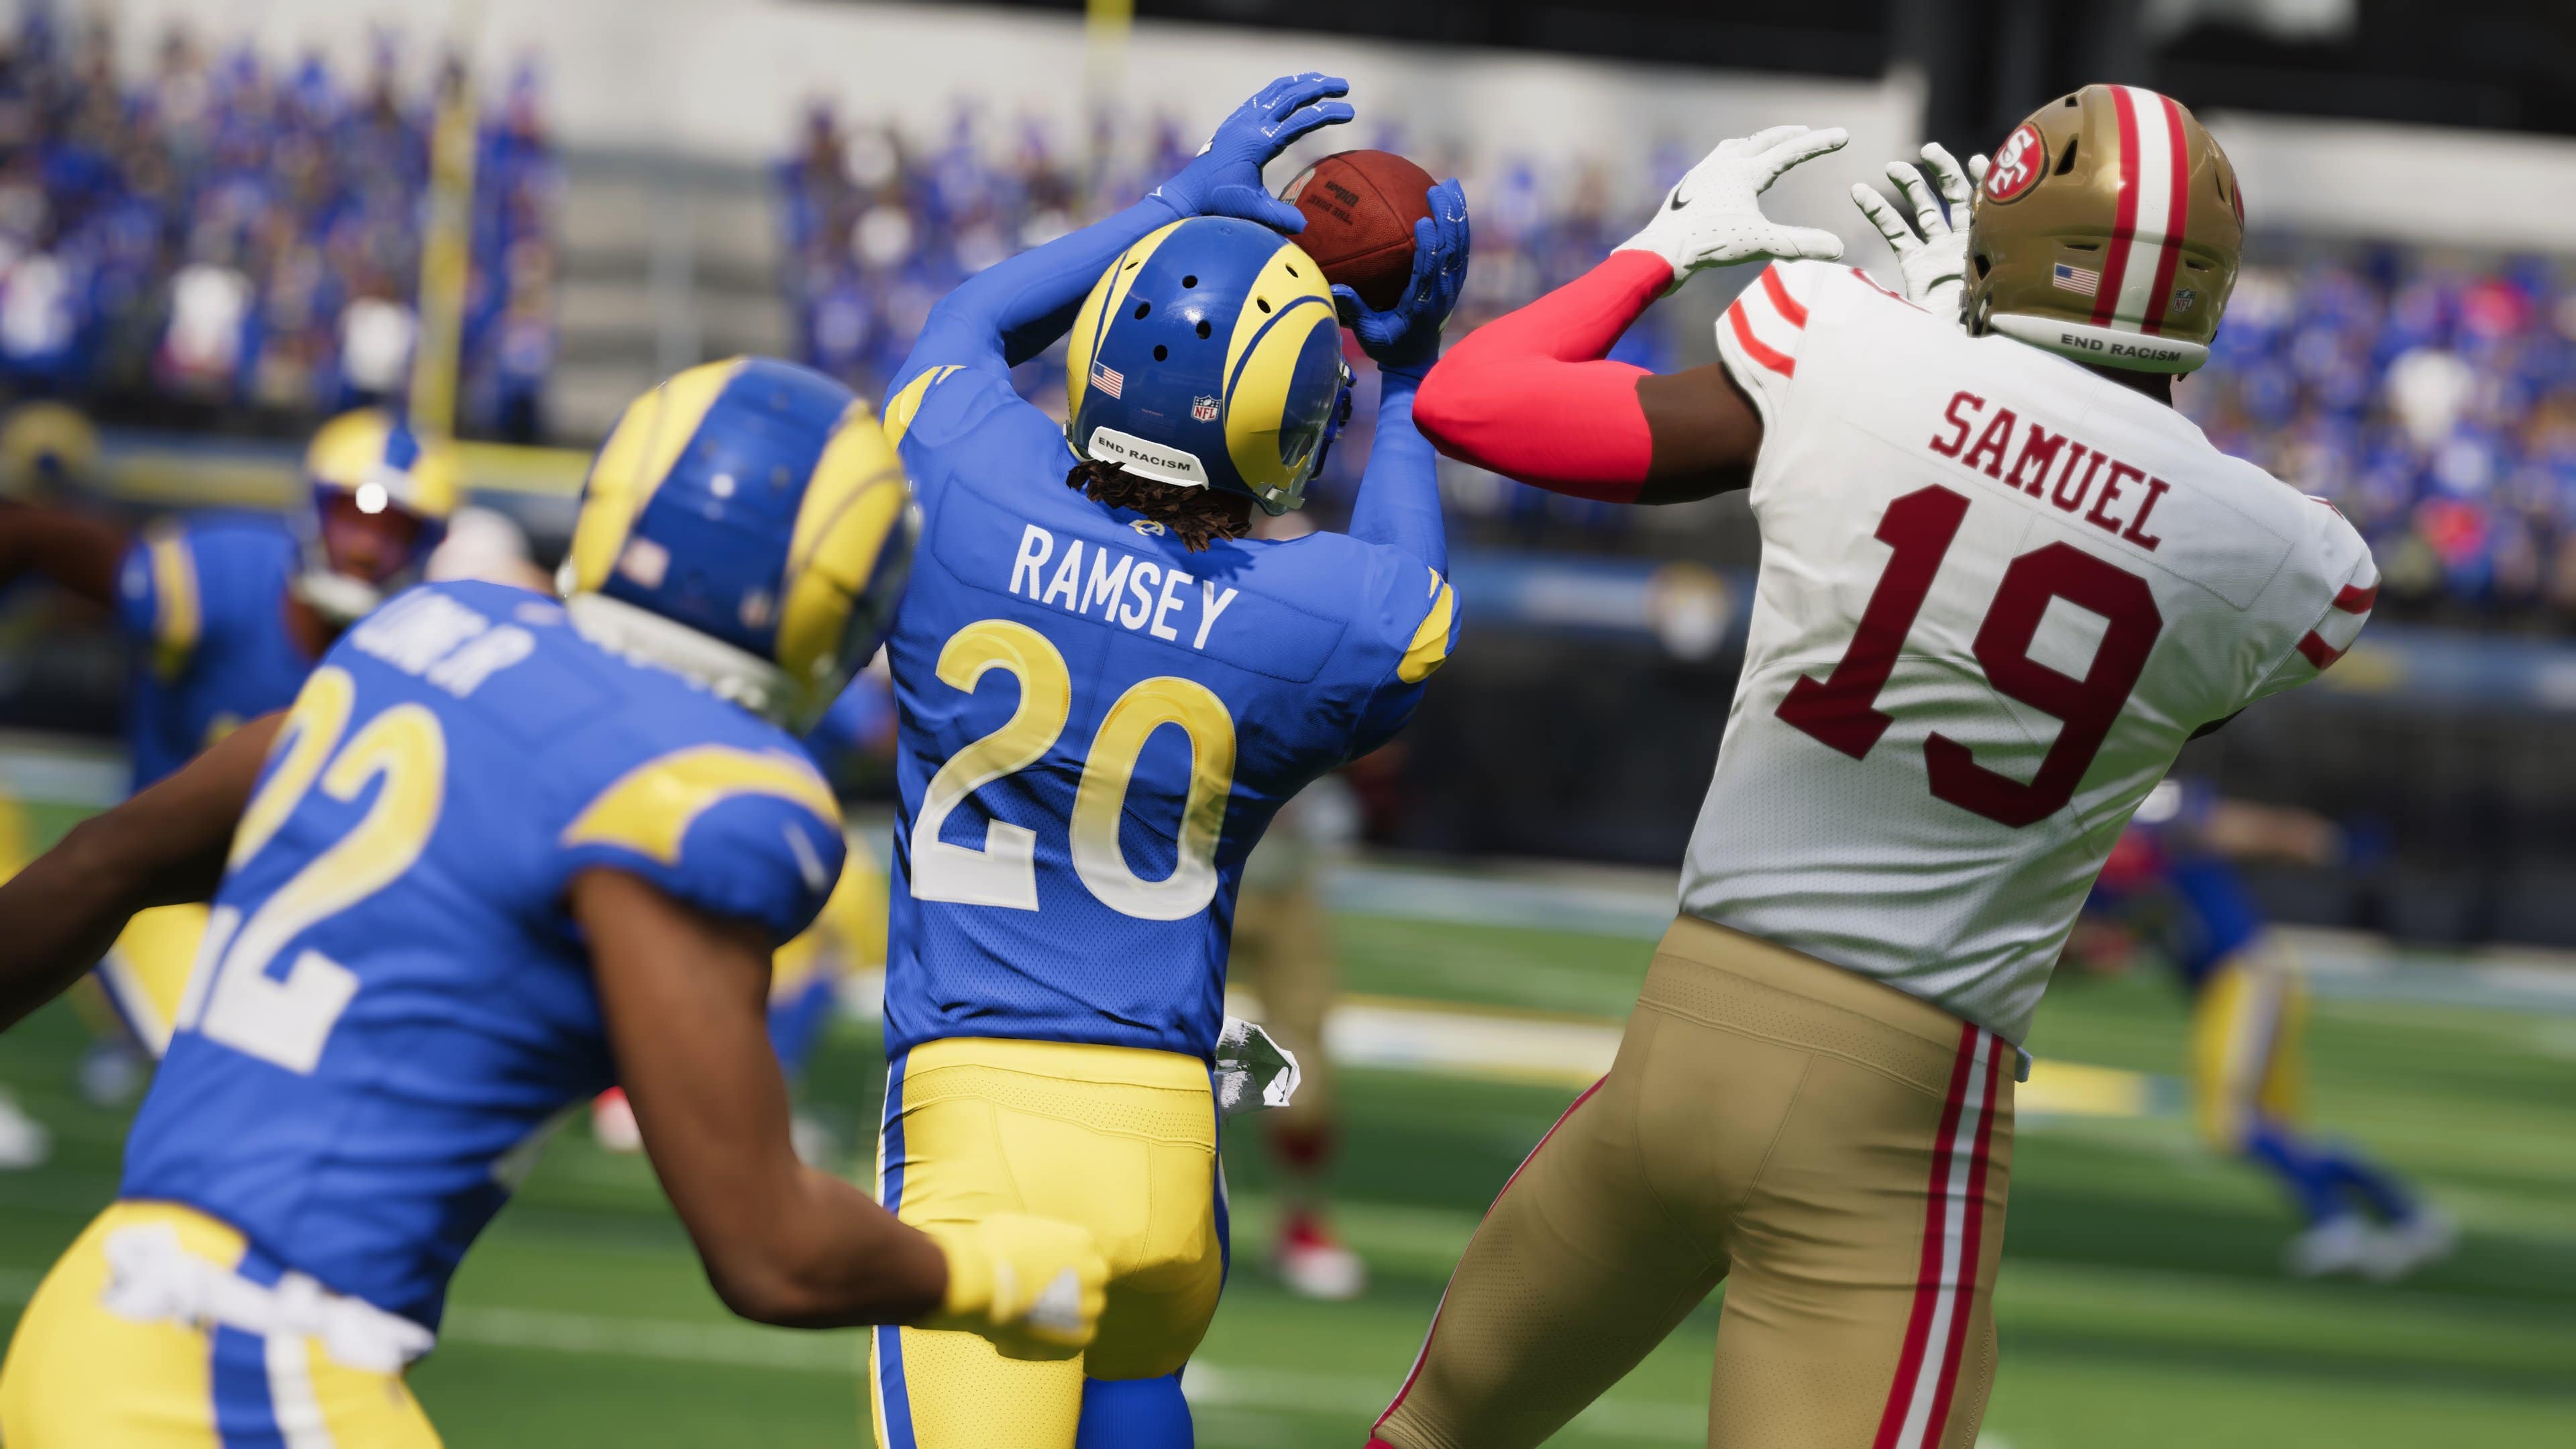 EA Madden 22 Update 2.01 TU3 Brings New Features This October 12